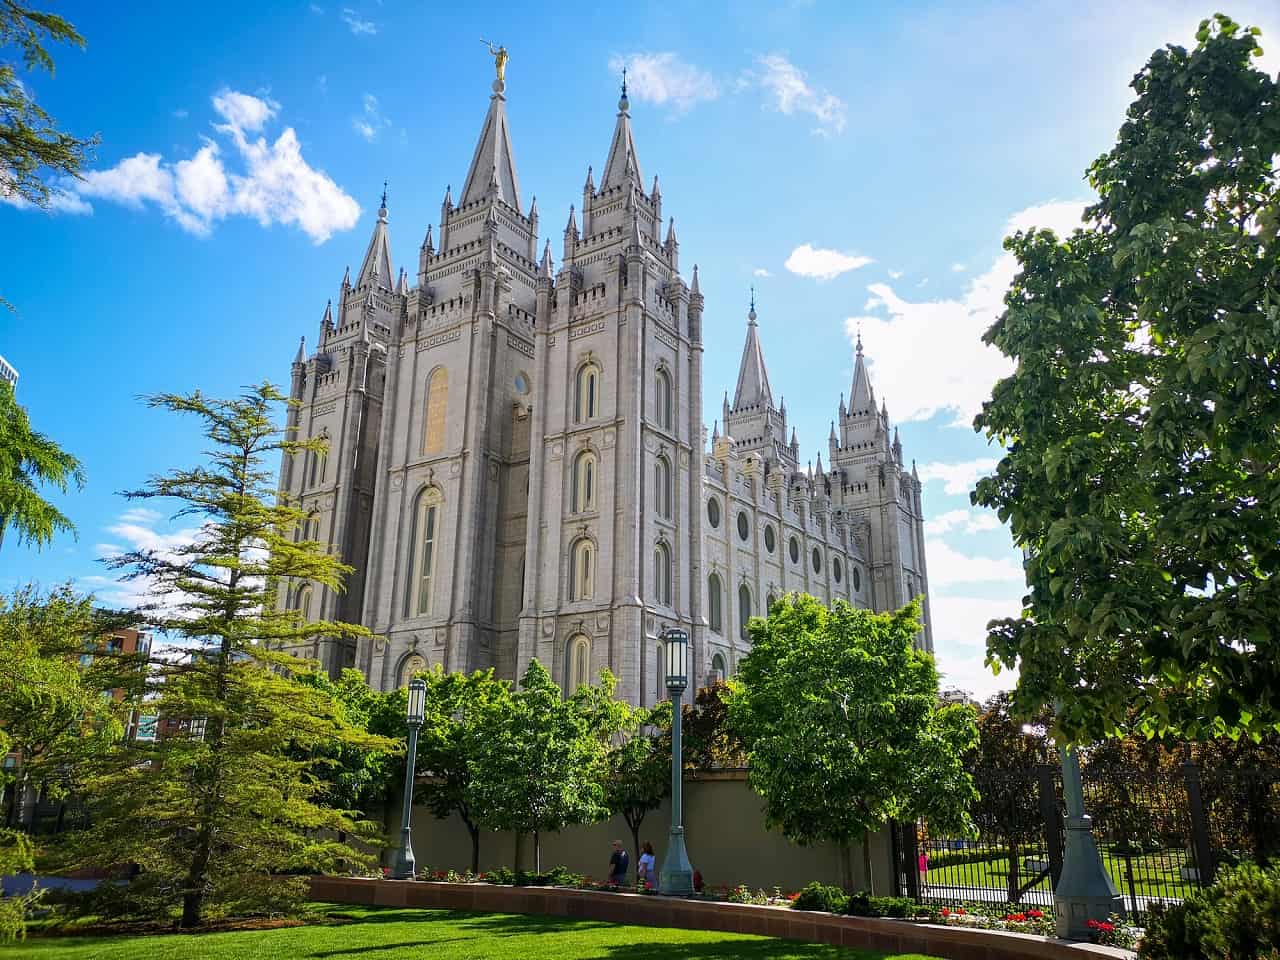 Top 20 Salt Lake City Attractions You Won't Want to Miss